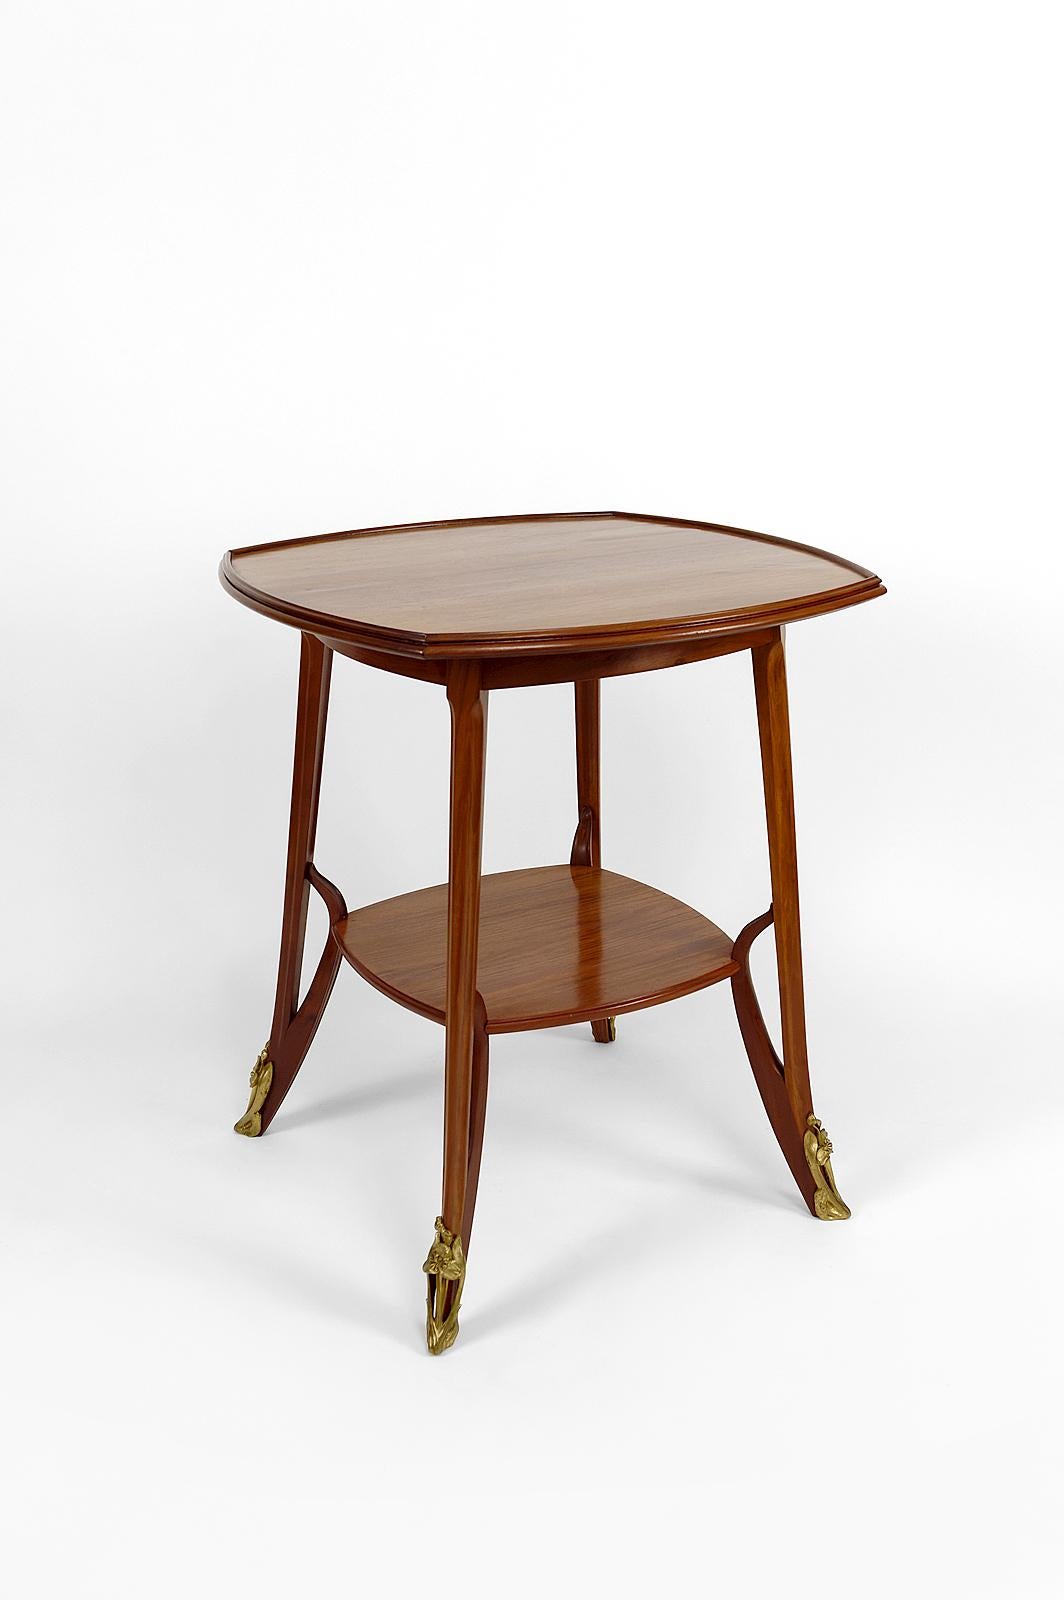 Superb pedestal / side table in mahogany with double trays. Each foot is decorated with a bronze shoe / hoof with a floral motif (clematis or orchids).

Art Nouveau, France, circa 1900.
Known and recognized model, from the Olga series, by Louis